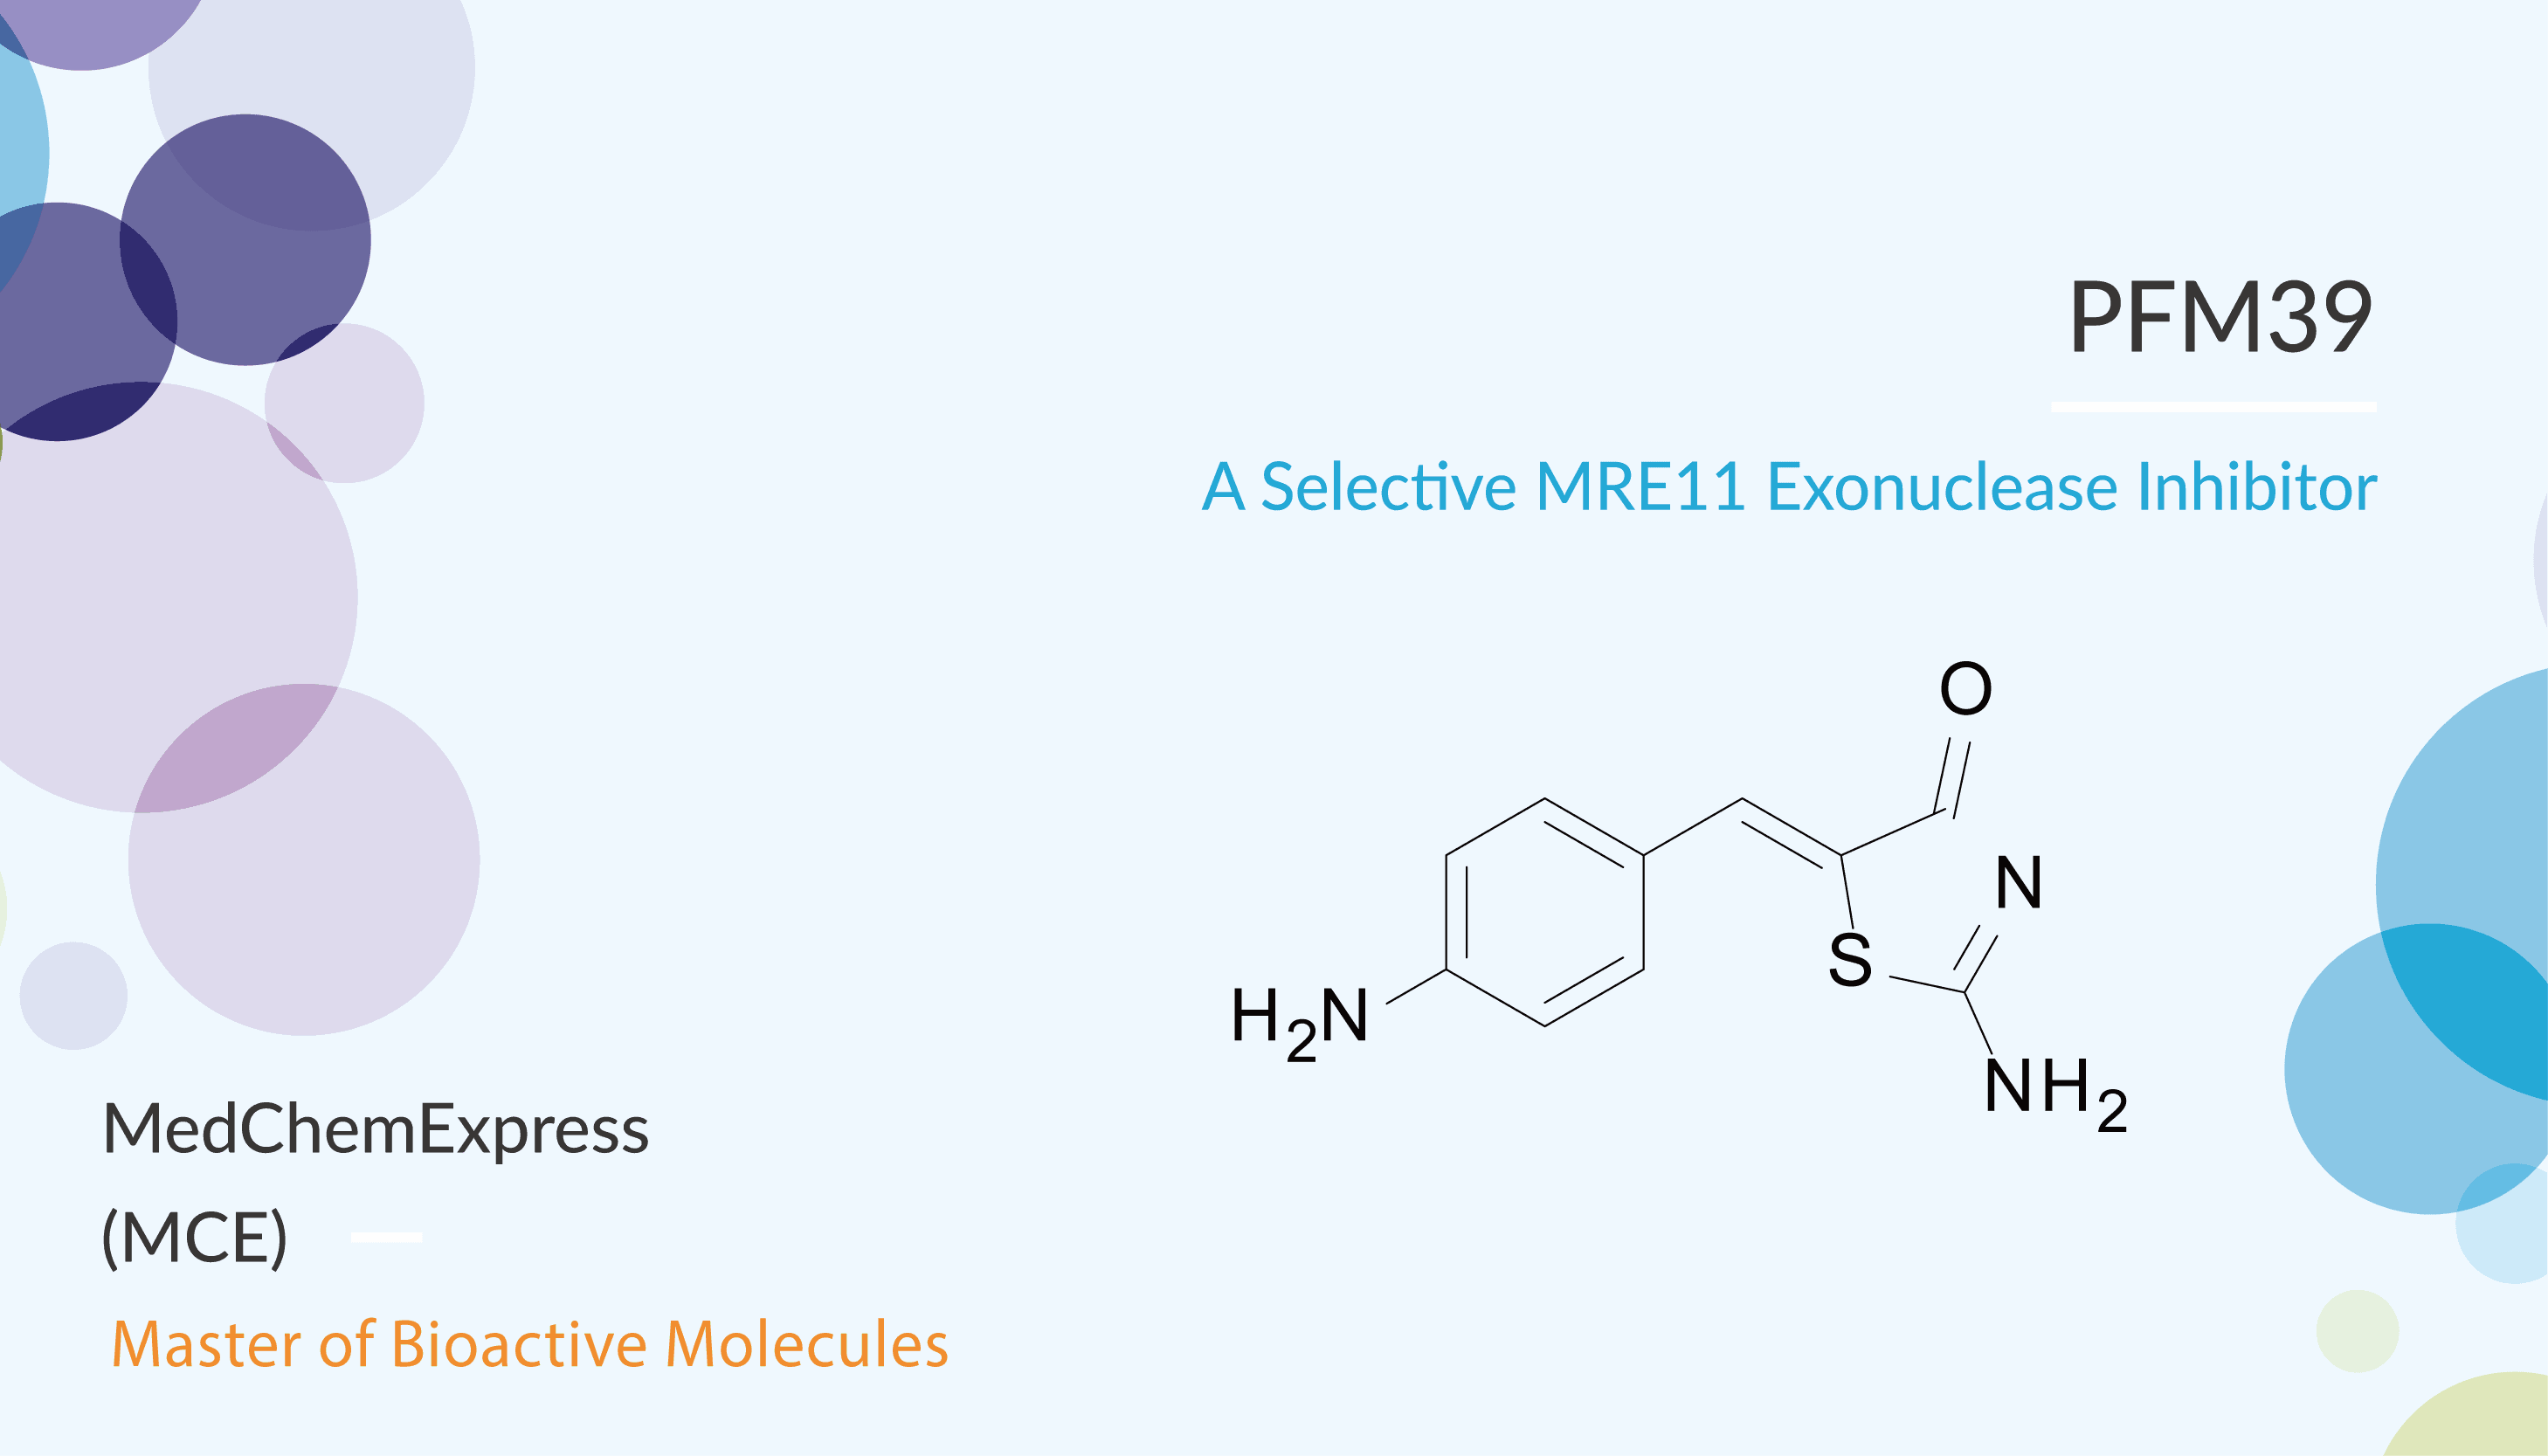 PFM39 is a Selective MRE11 Exonuclease Inhibitor 2022 02 10 画板 1 - PFM39 is a Selective MRE11 Exonuclease Inhibitor